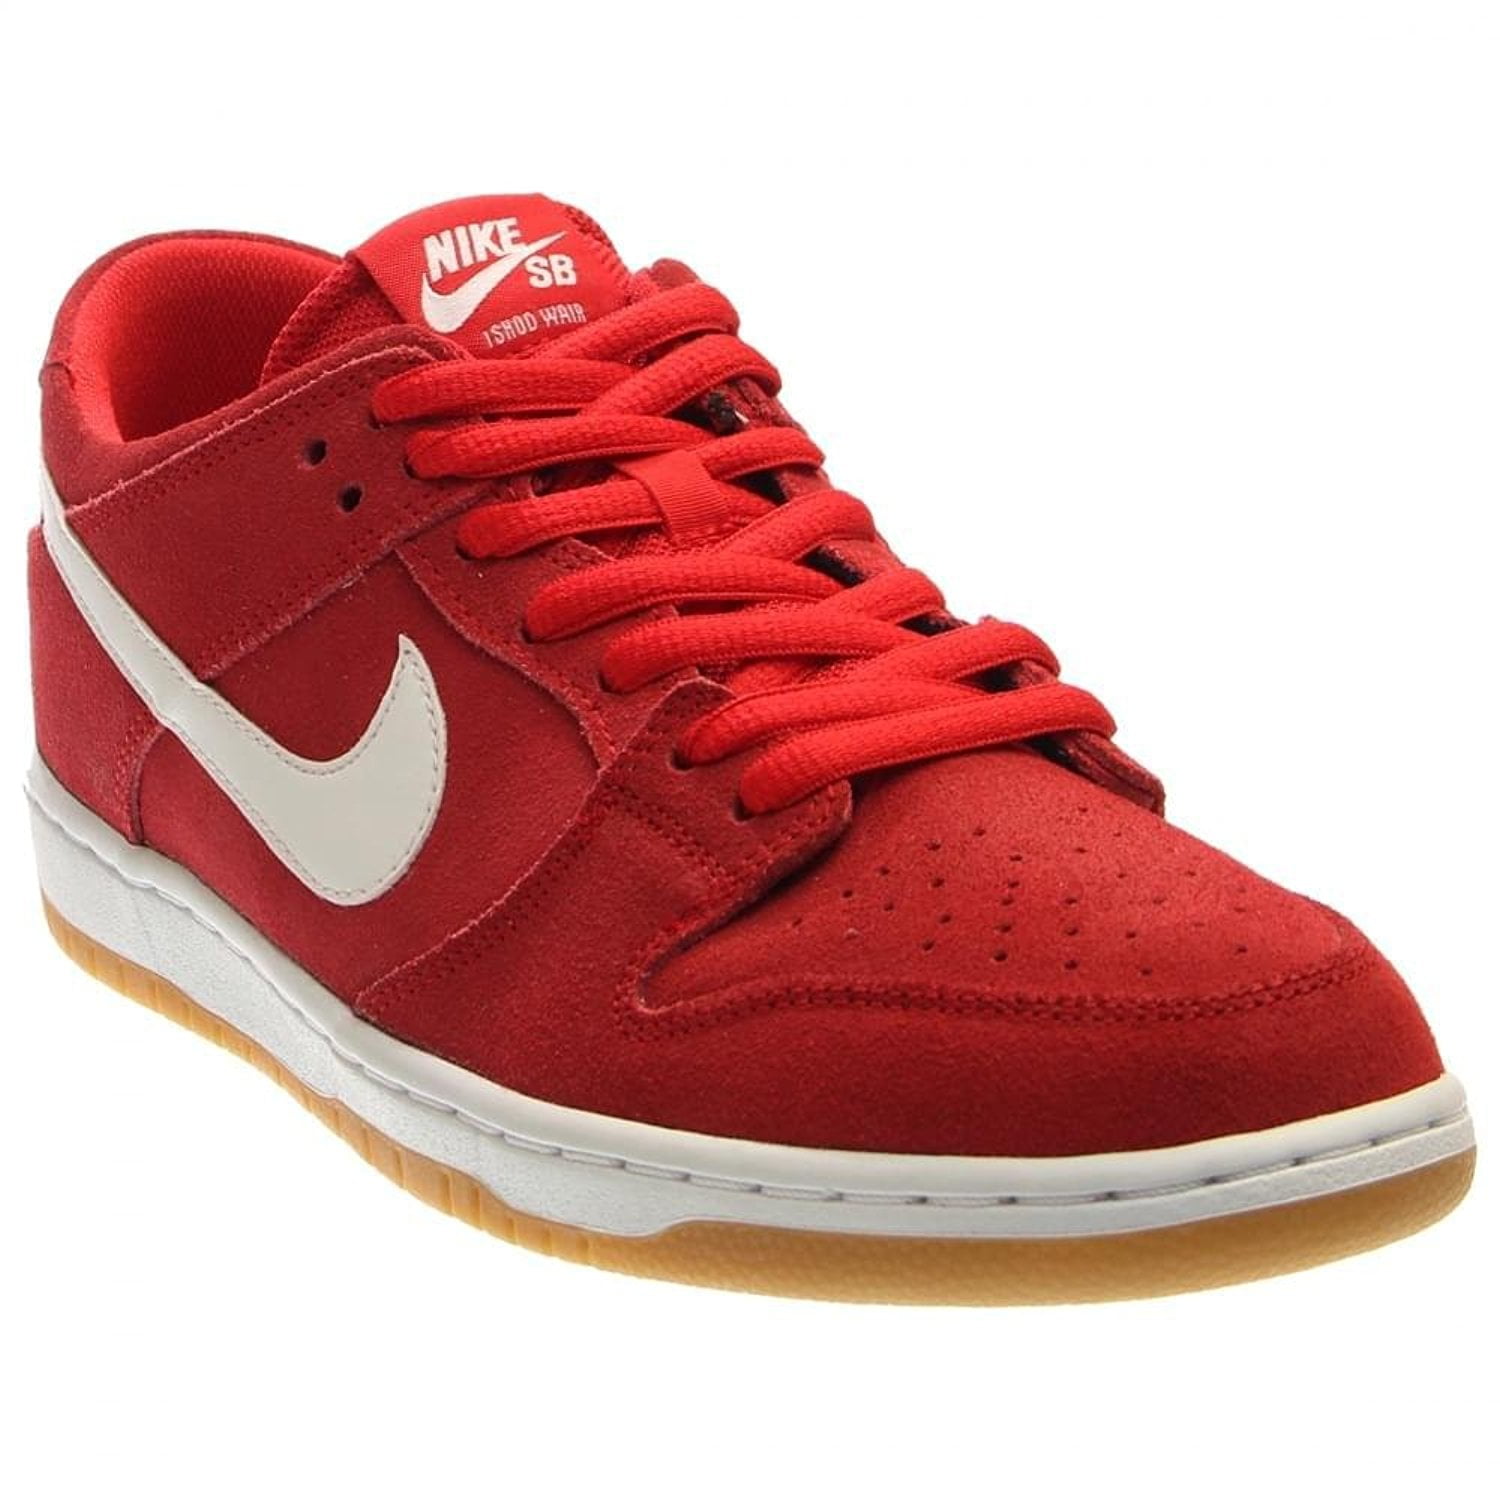 Especificidad Auckland tono Nike Mens Dunk Low Pro IW Skateboarding Shoes University Red/White-Gum  Light Brown Leather - Walmart.com